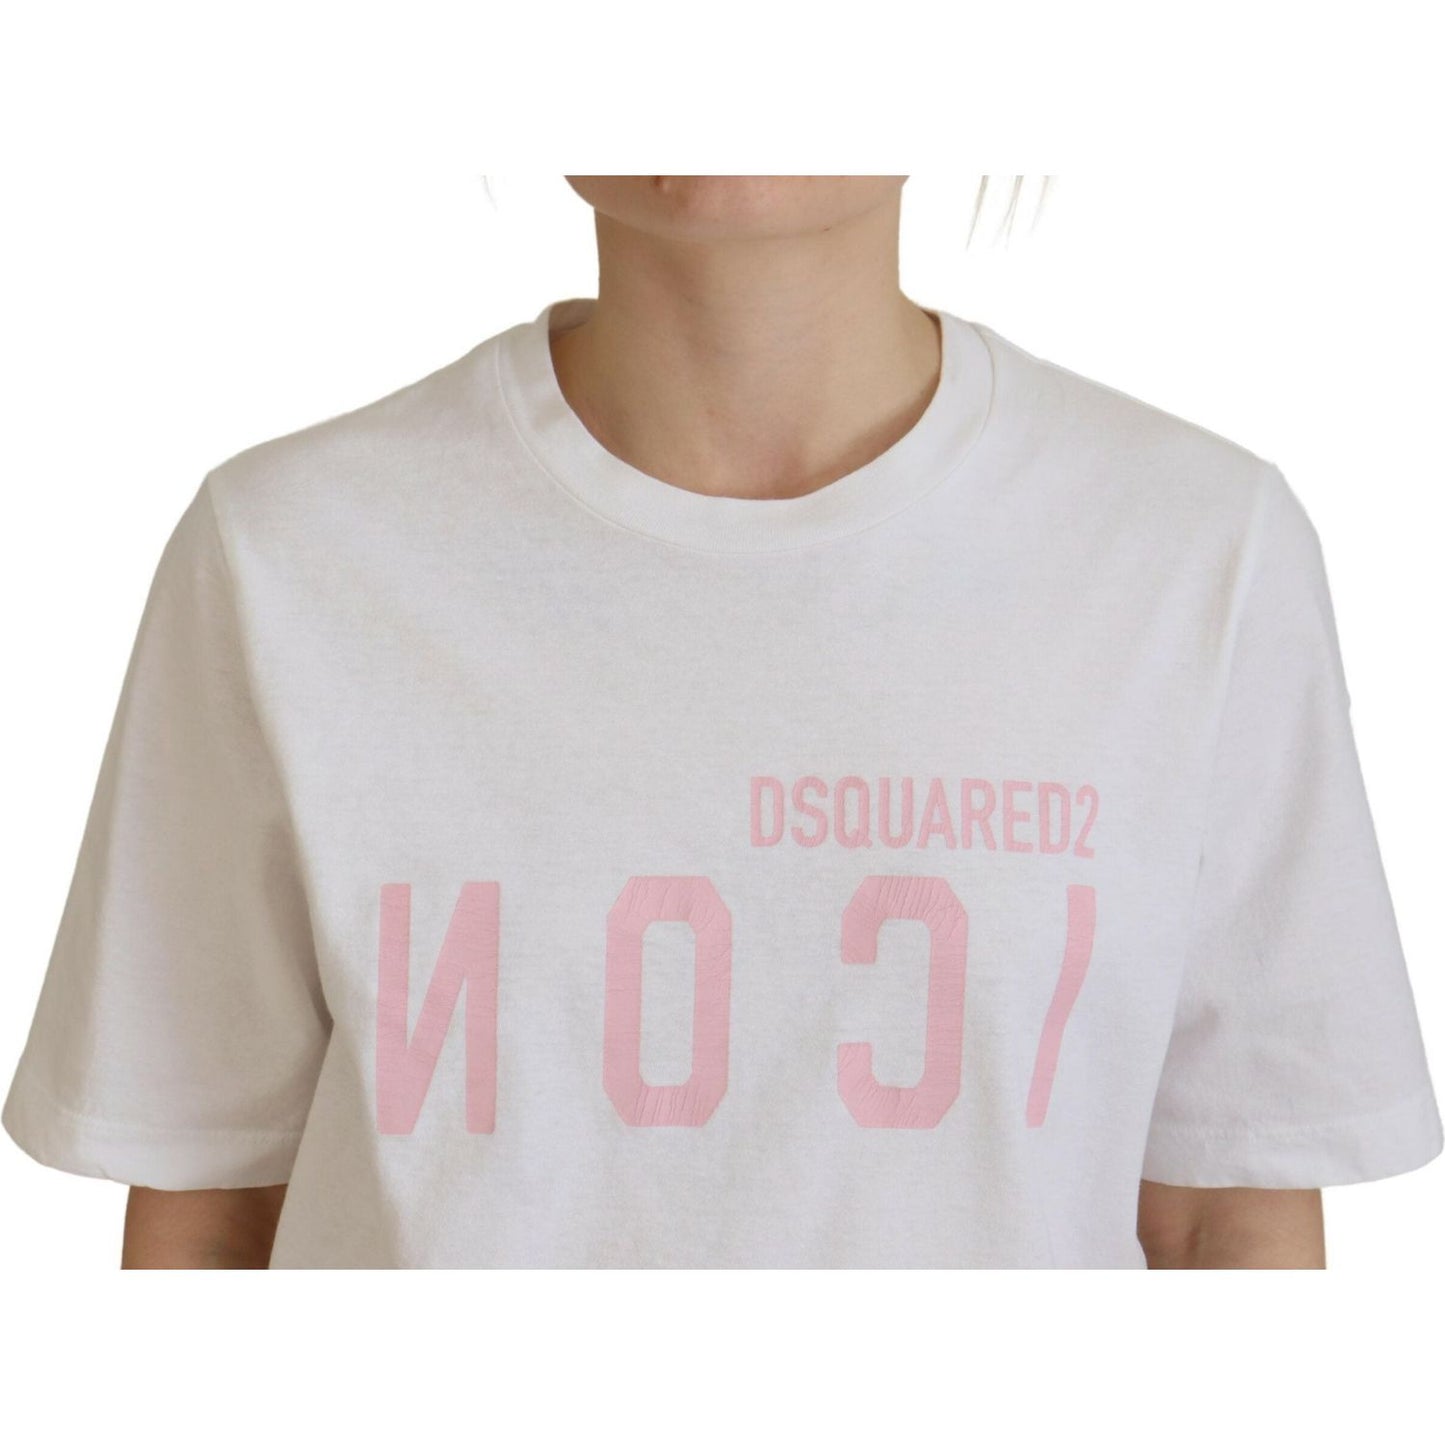 Dsquared² White Cotton Shiny Icon East Tee Crewneck T-shirt white-cotton-shiny-icon-east-tee-crewneck-t-shirt-1